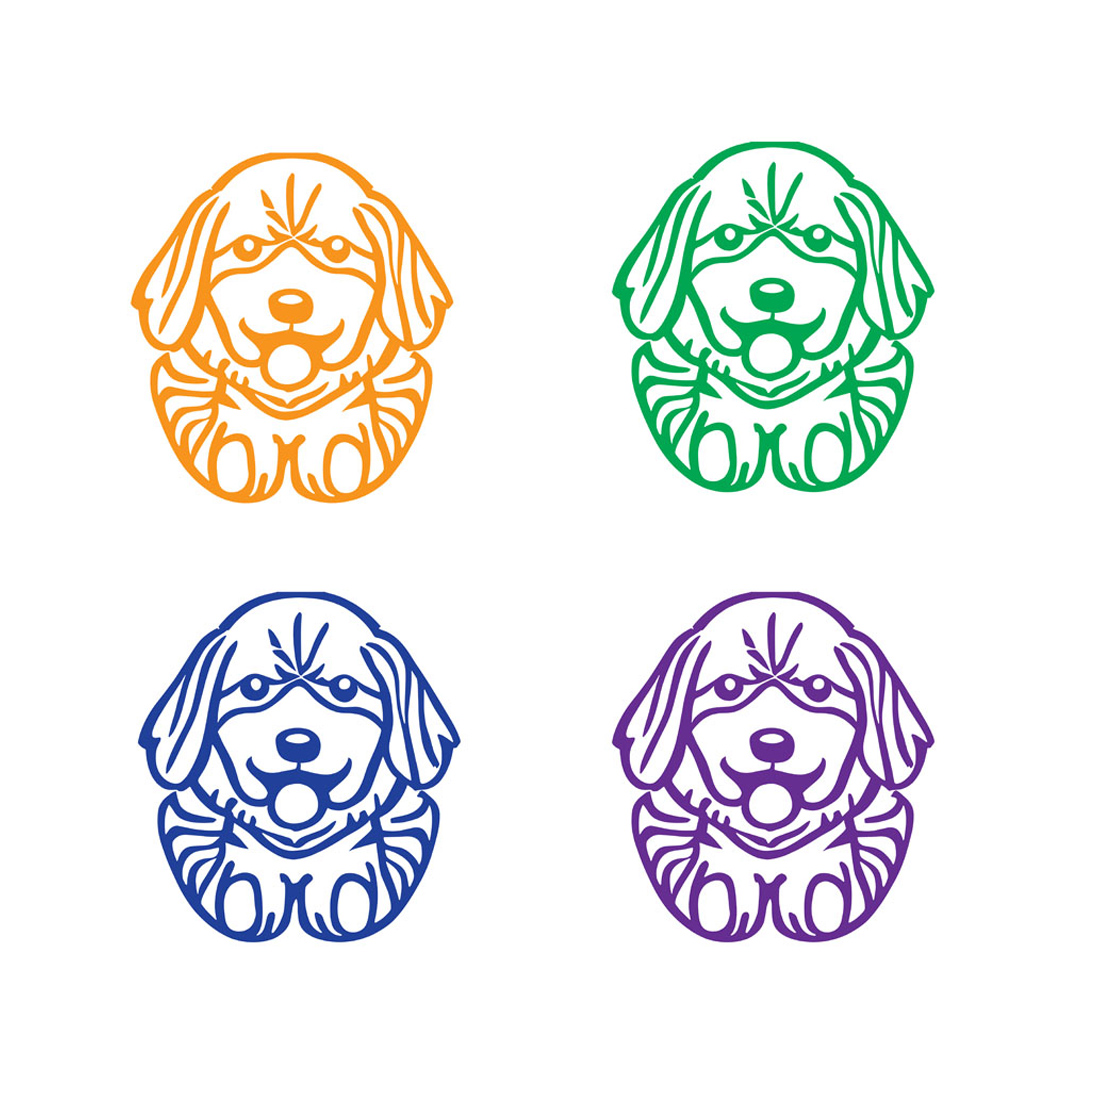 A Cute Dog logo Illustration preview image.